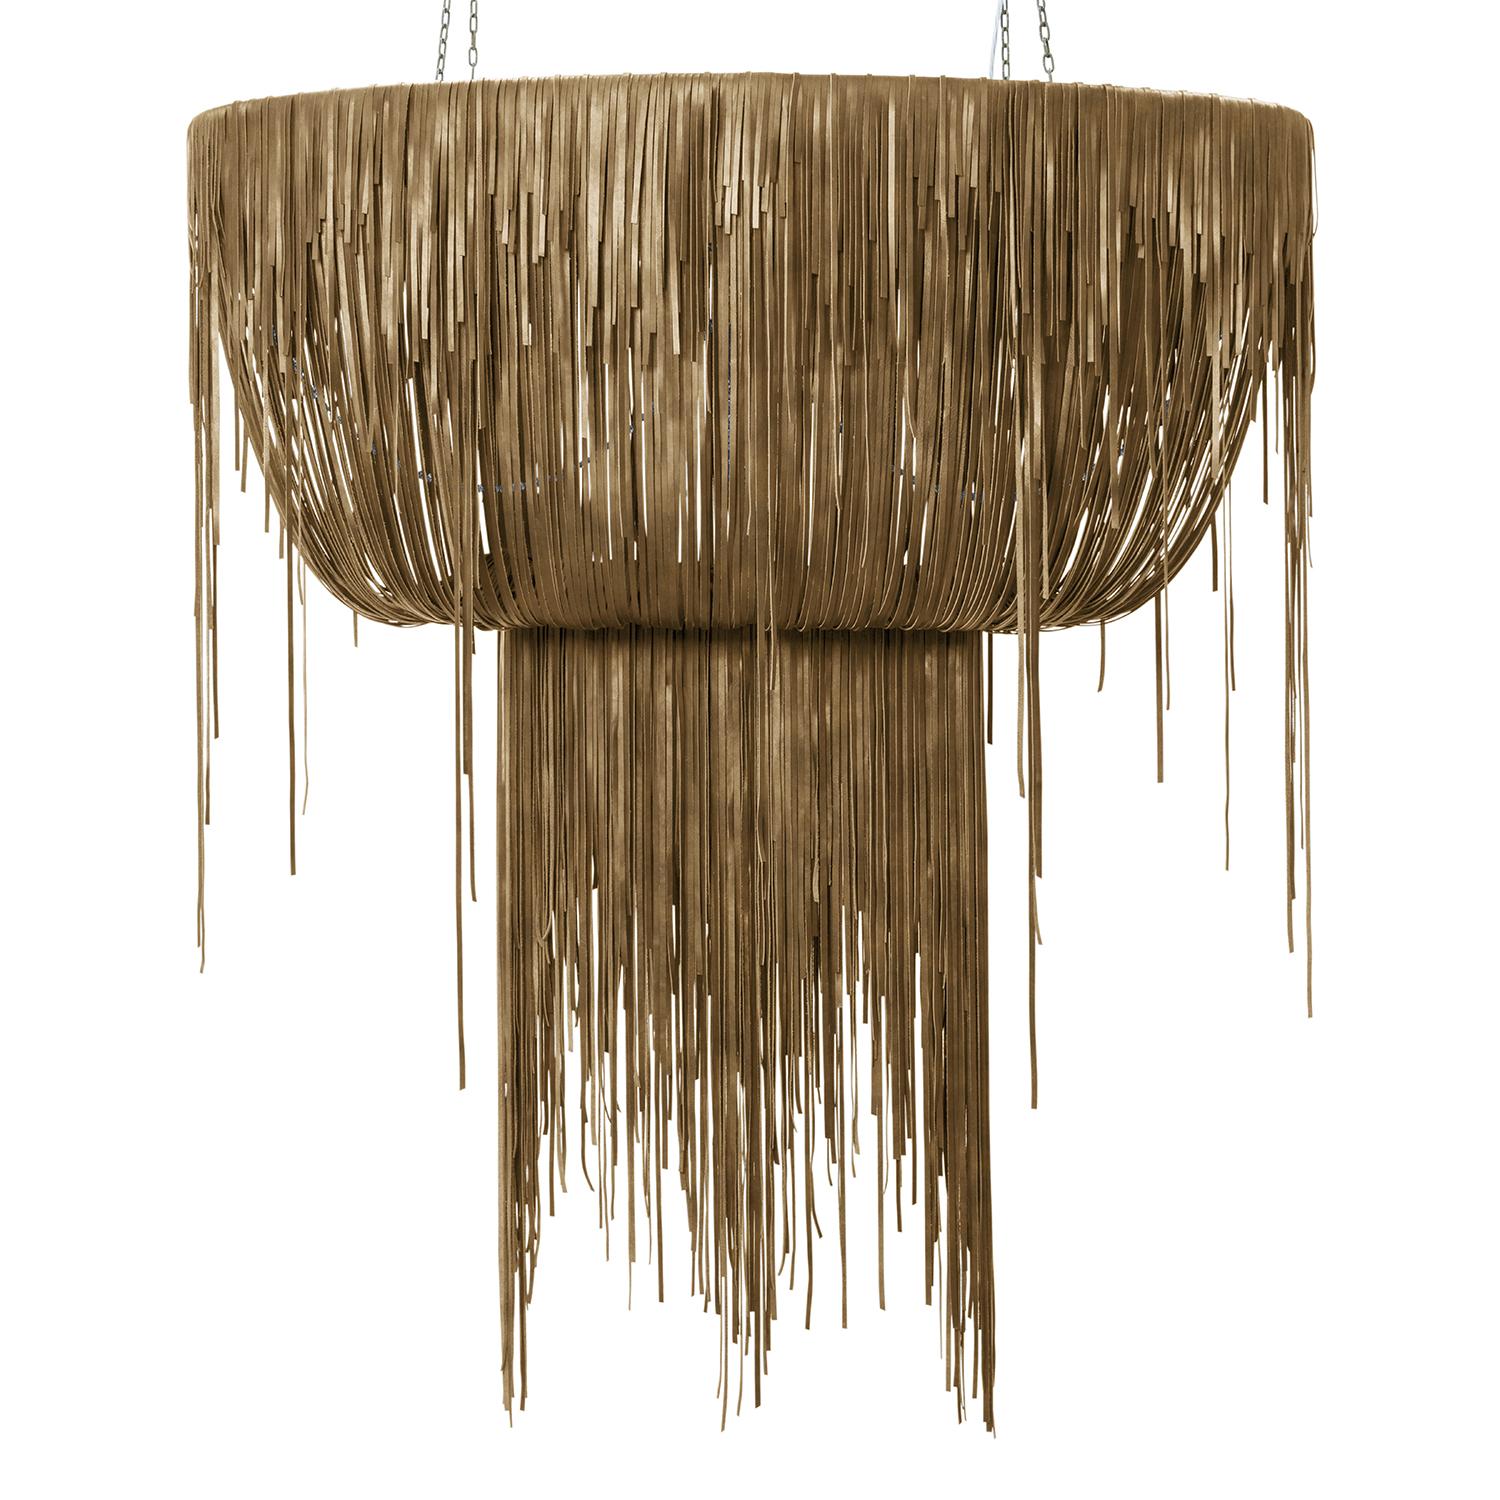 Urchin Chandelier - Oval - Large - Premium Leather